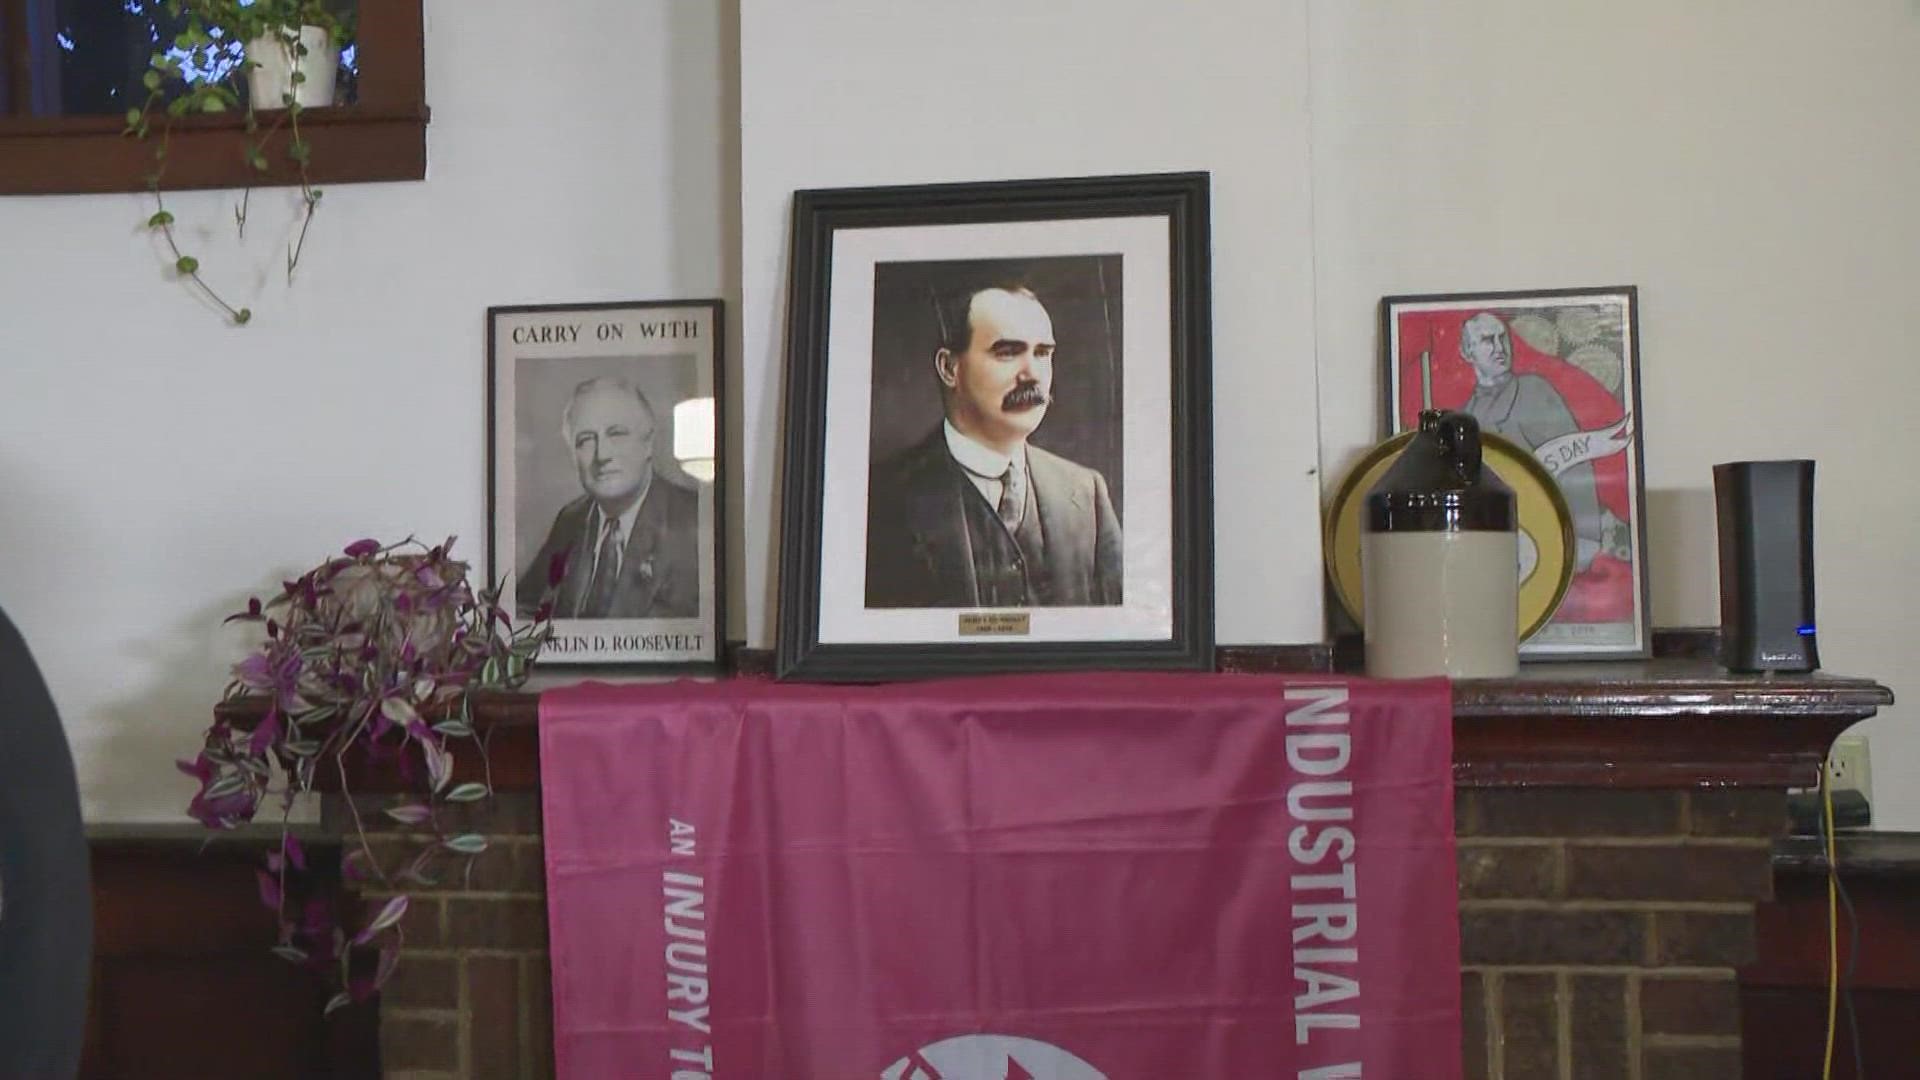 The event takes place on Saturday in the Broadway-Fillmore neighborhood. Daybreak's Lauren Hall was live at  Eugene V. Debs Hall, which will be part of Doors Open.